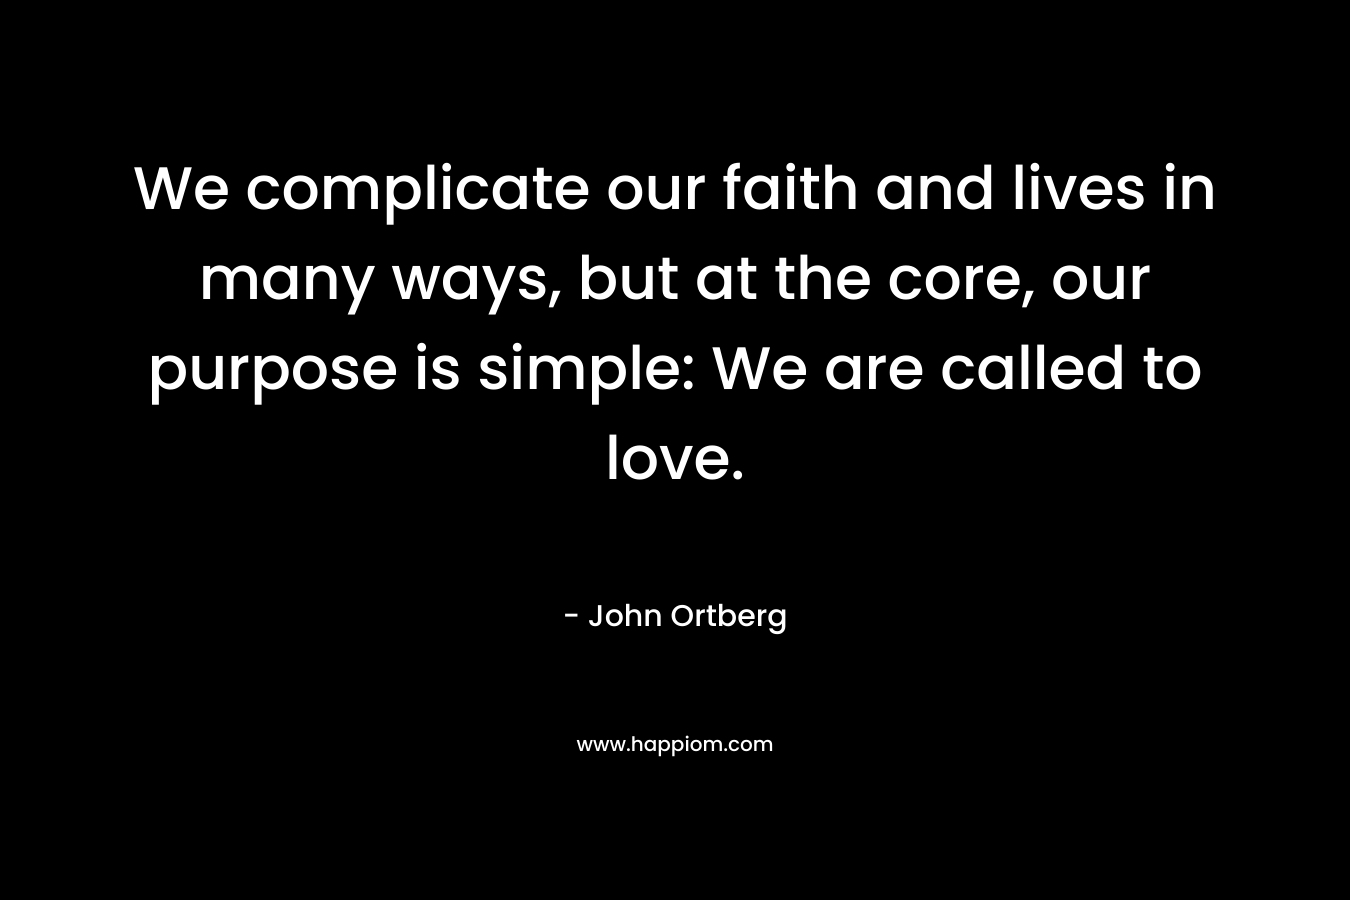 We complicate our faith and lives in many ways, but at the core, our purpose is simple: We are called to love. – John Ortberg